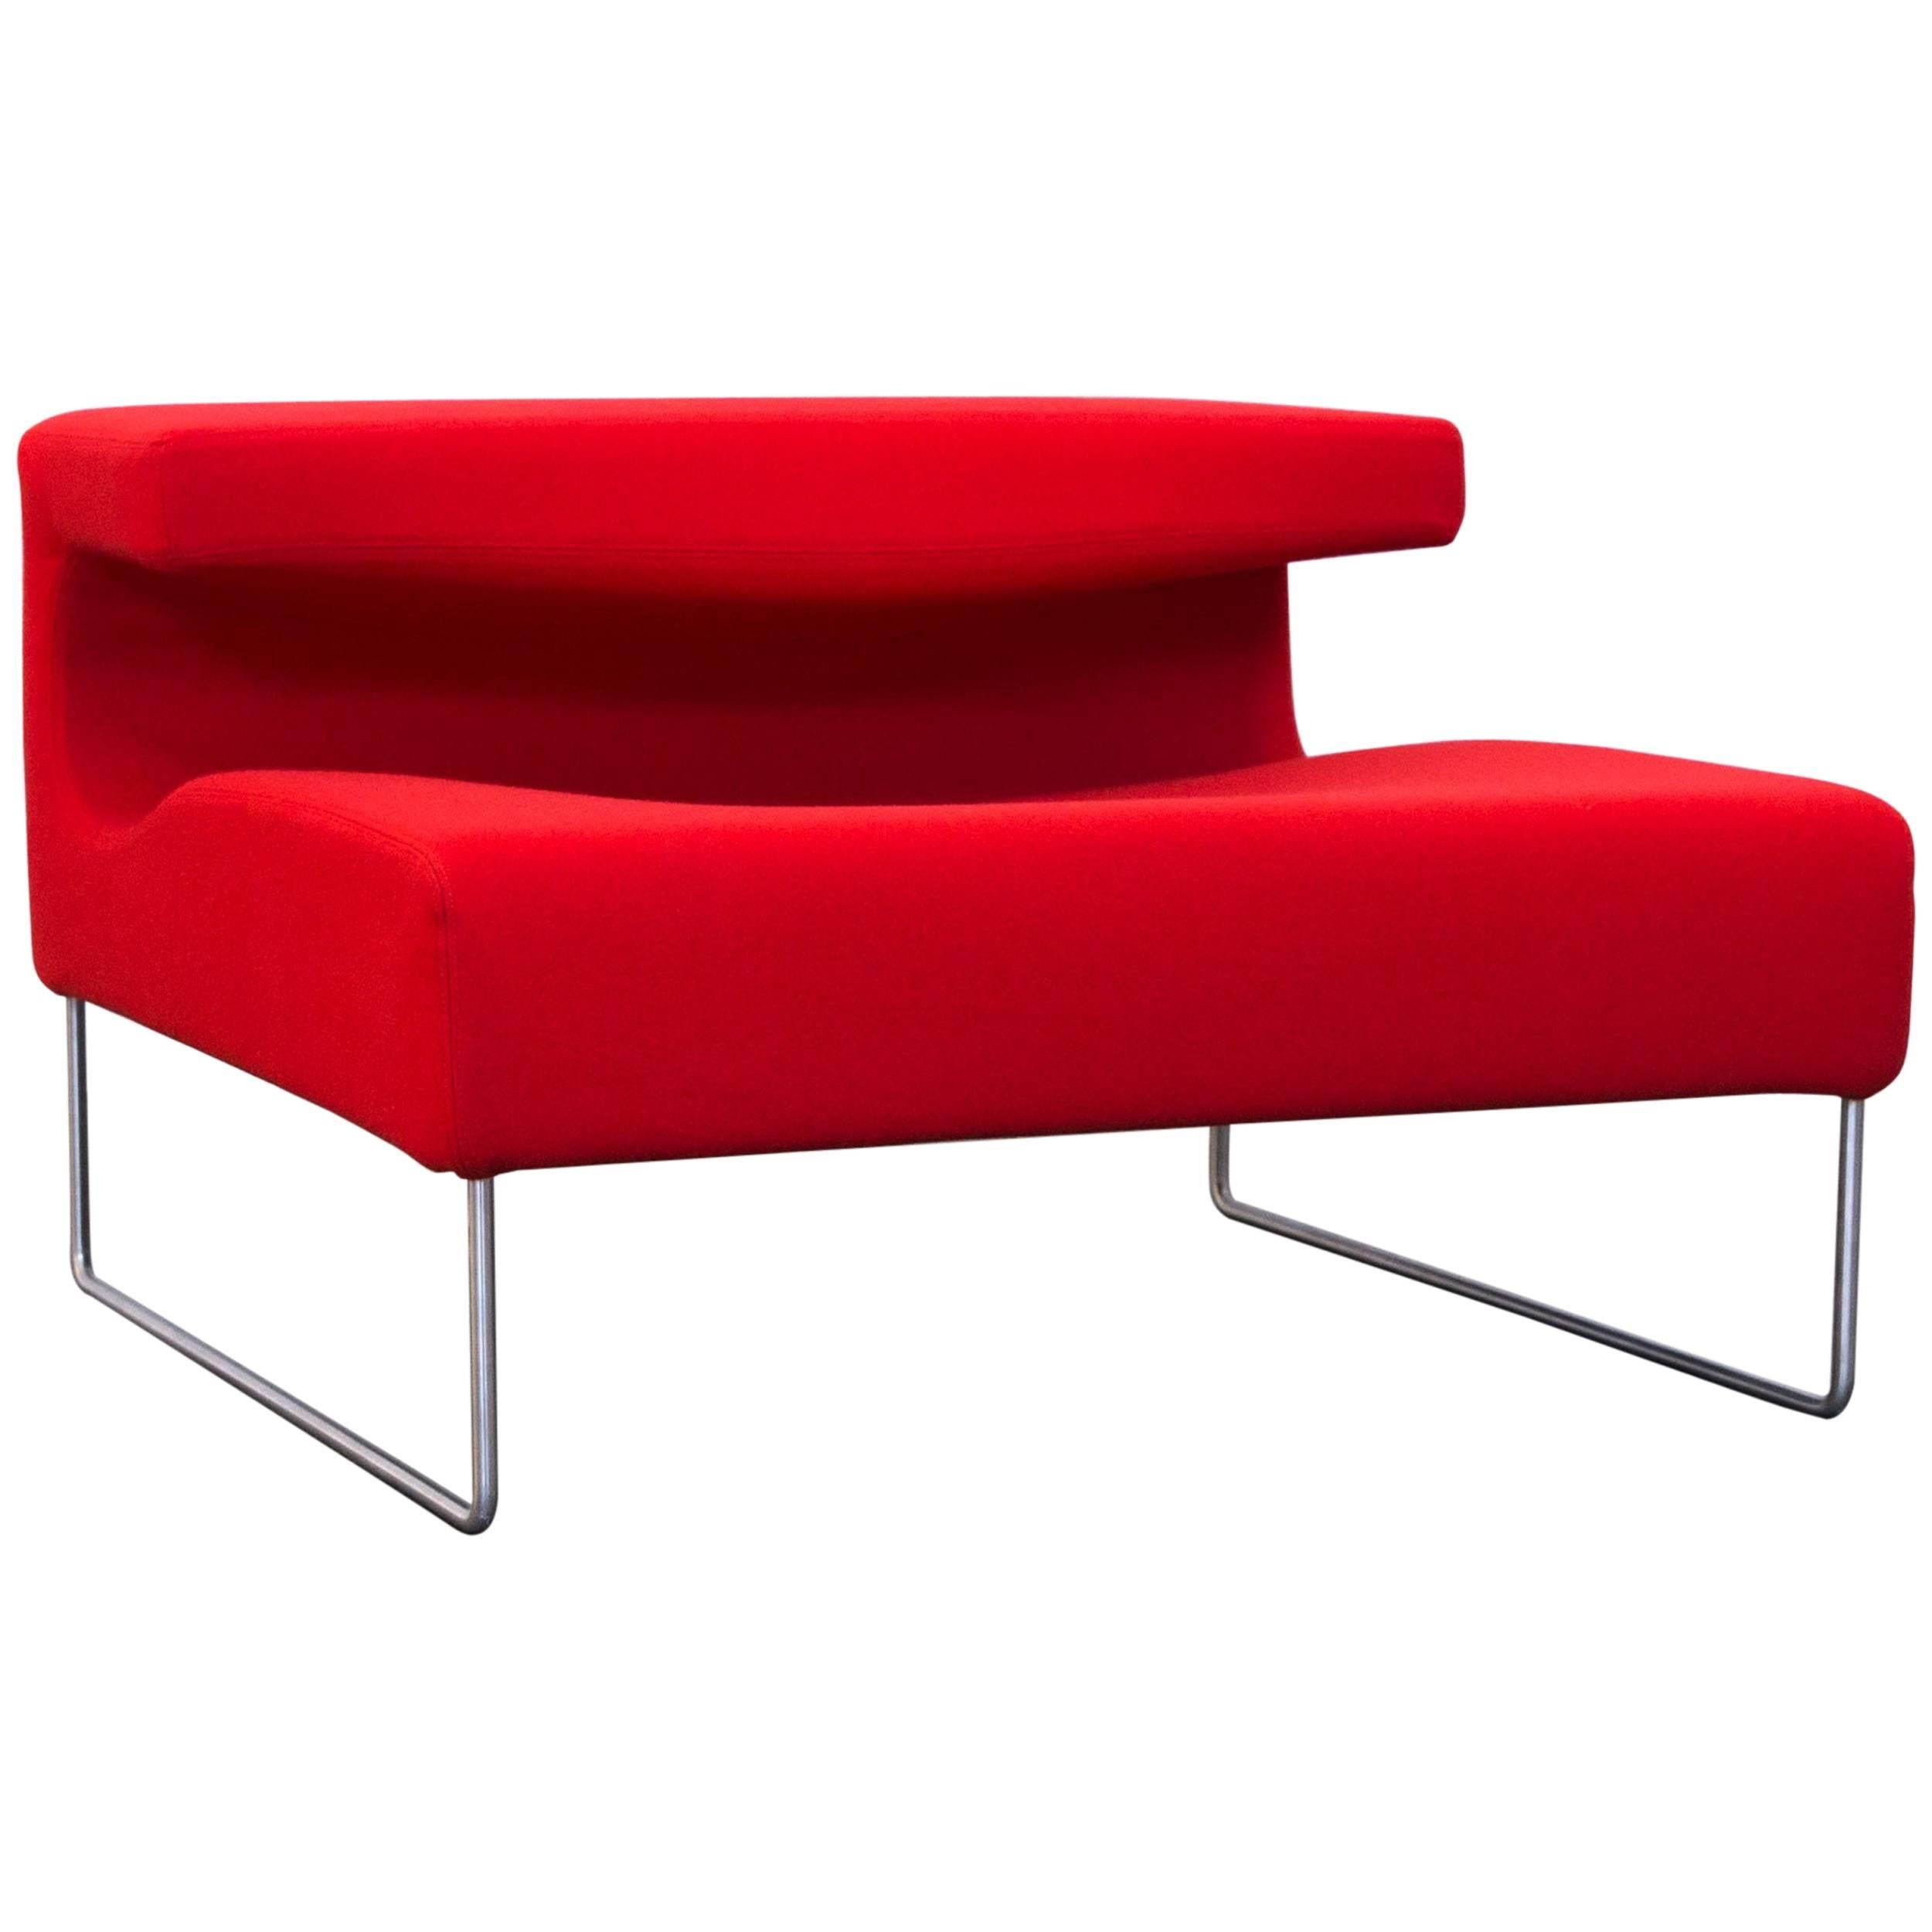 Moroso Lowseat Designer Chair Fabric Red One-Seat Microfibre Couch Modern